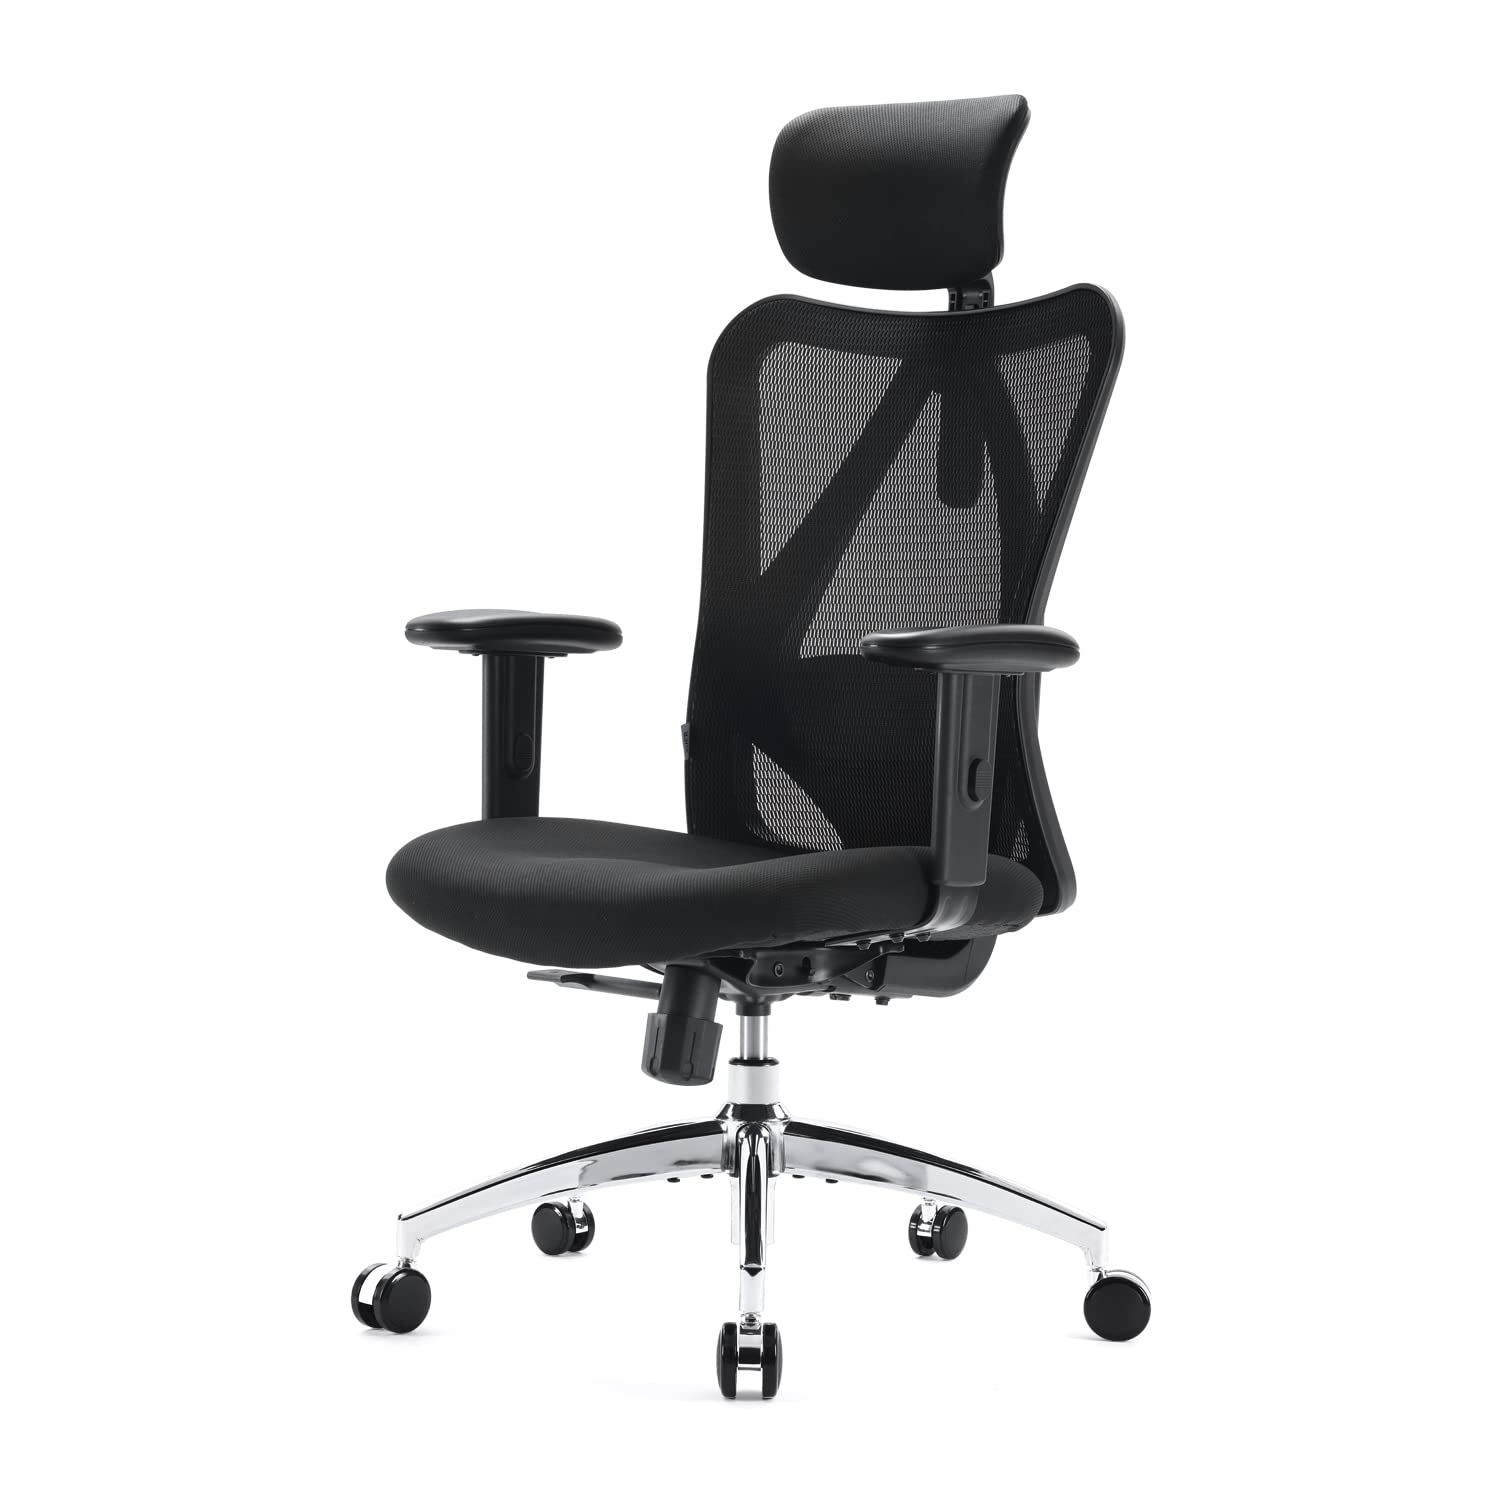 SIHOO M18 Ergonomic Office Chair for Big and Tall People Adjustable Headrest with 2D Armrest- $129.09